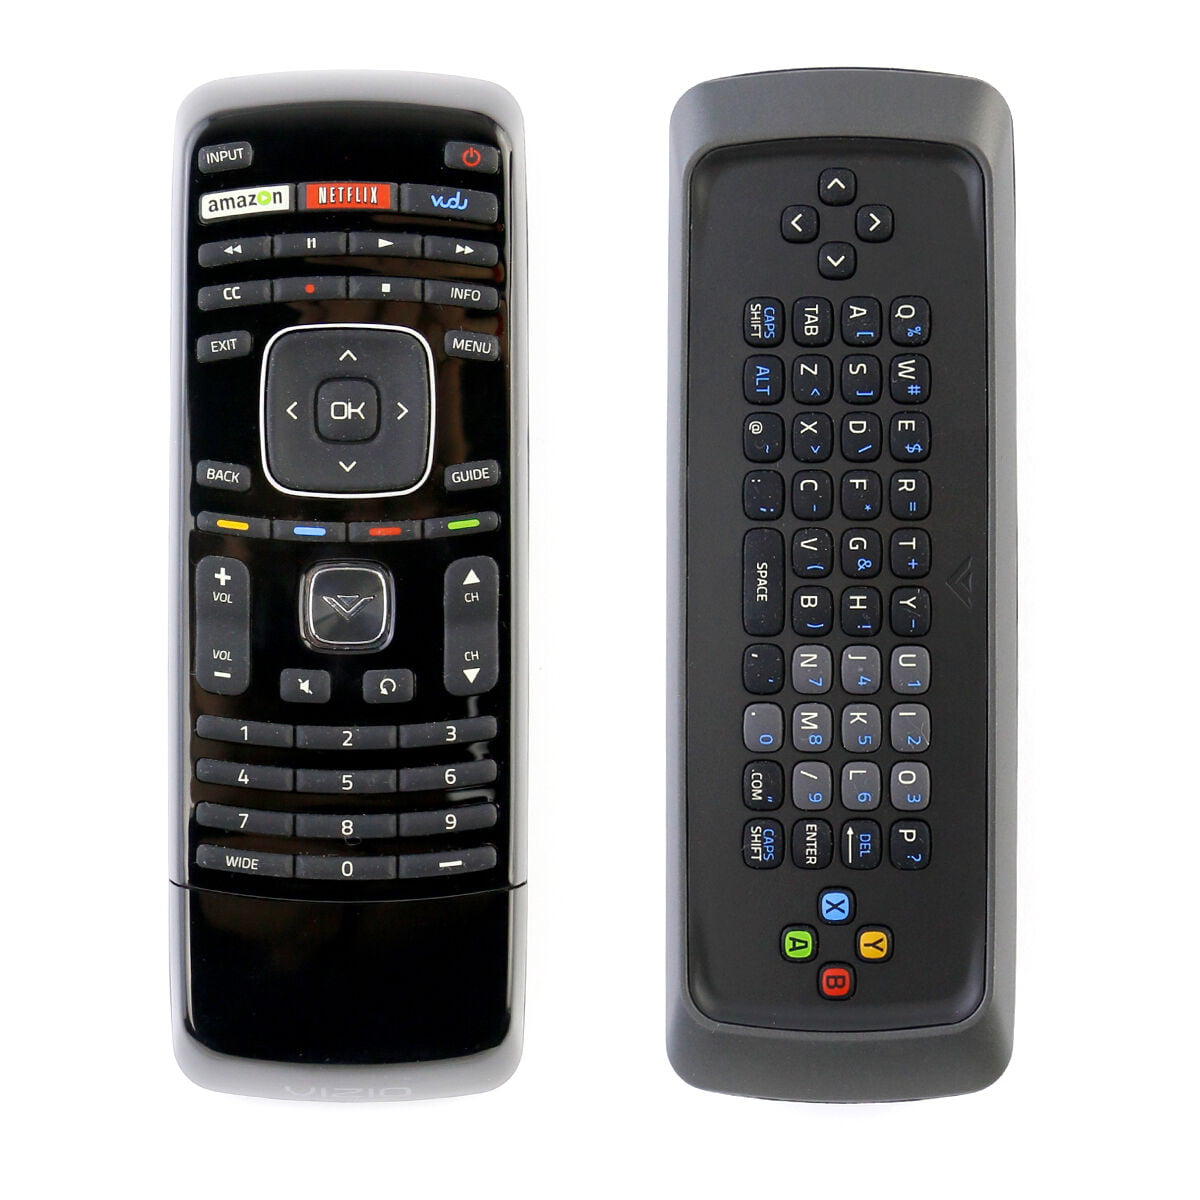 New Vizio smart QWERTY keyboard Remote for XVT323SV XVT373SV XVT423SV XVT473SV 